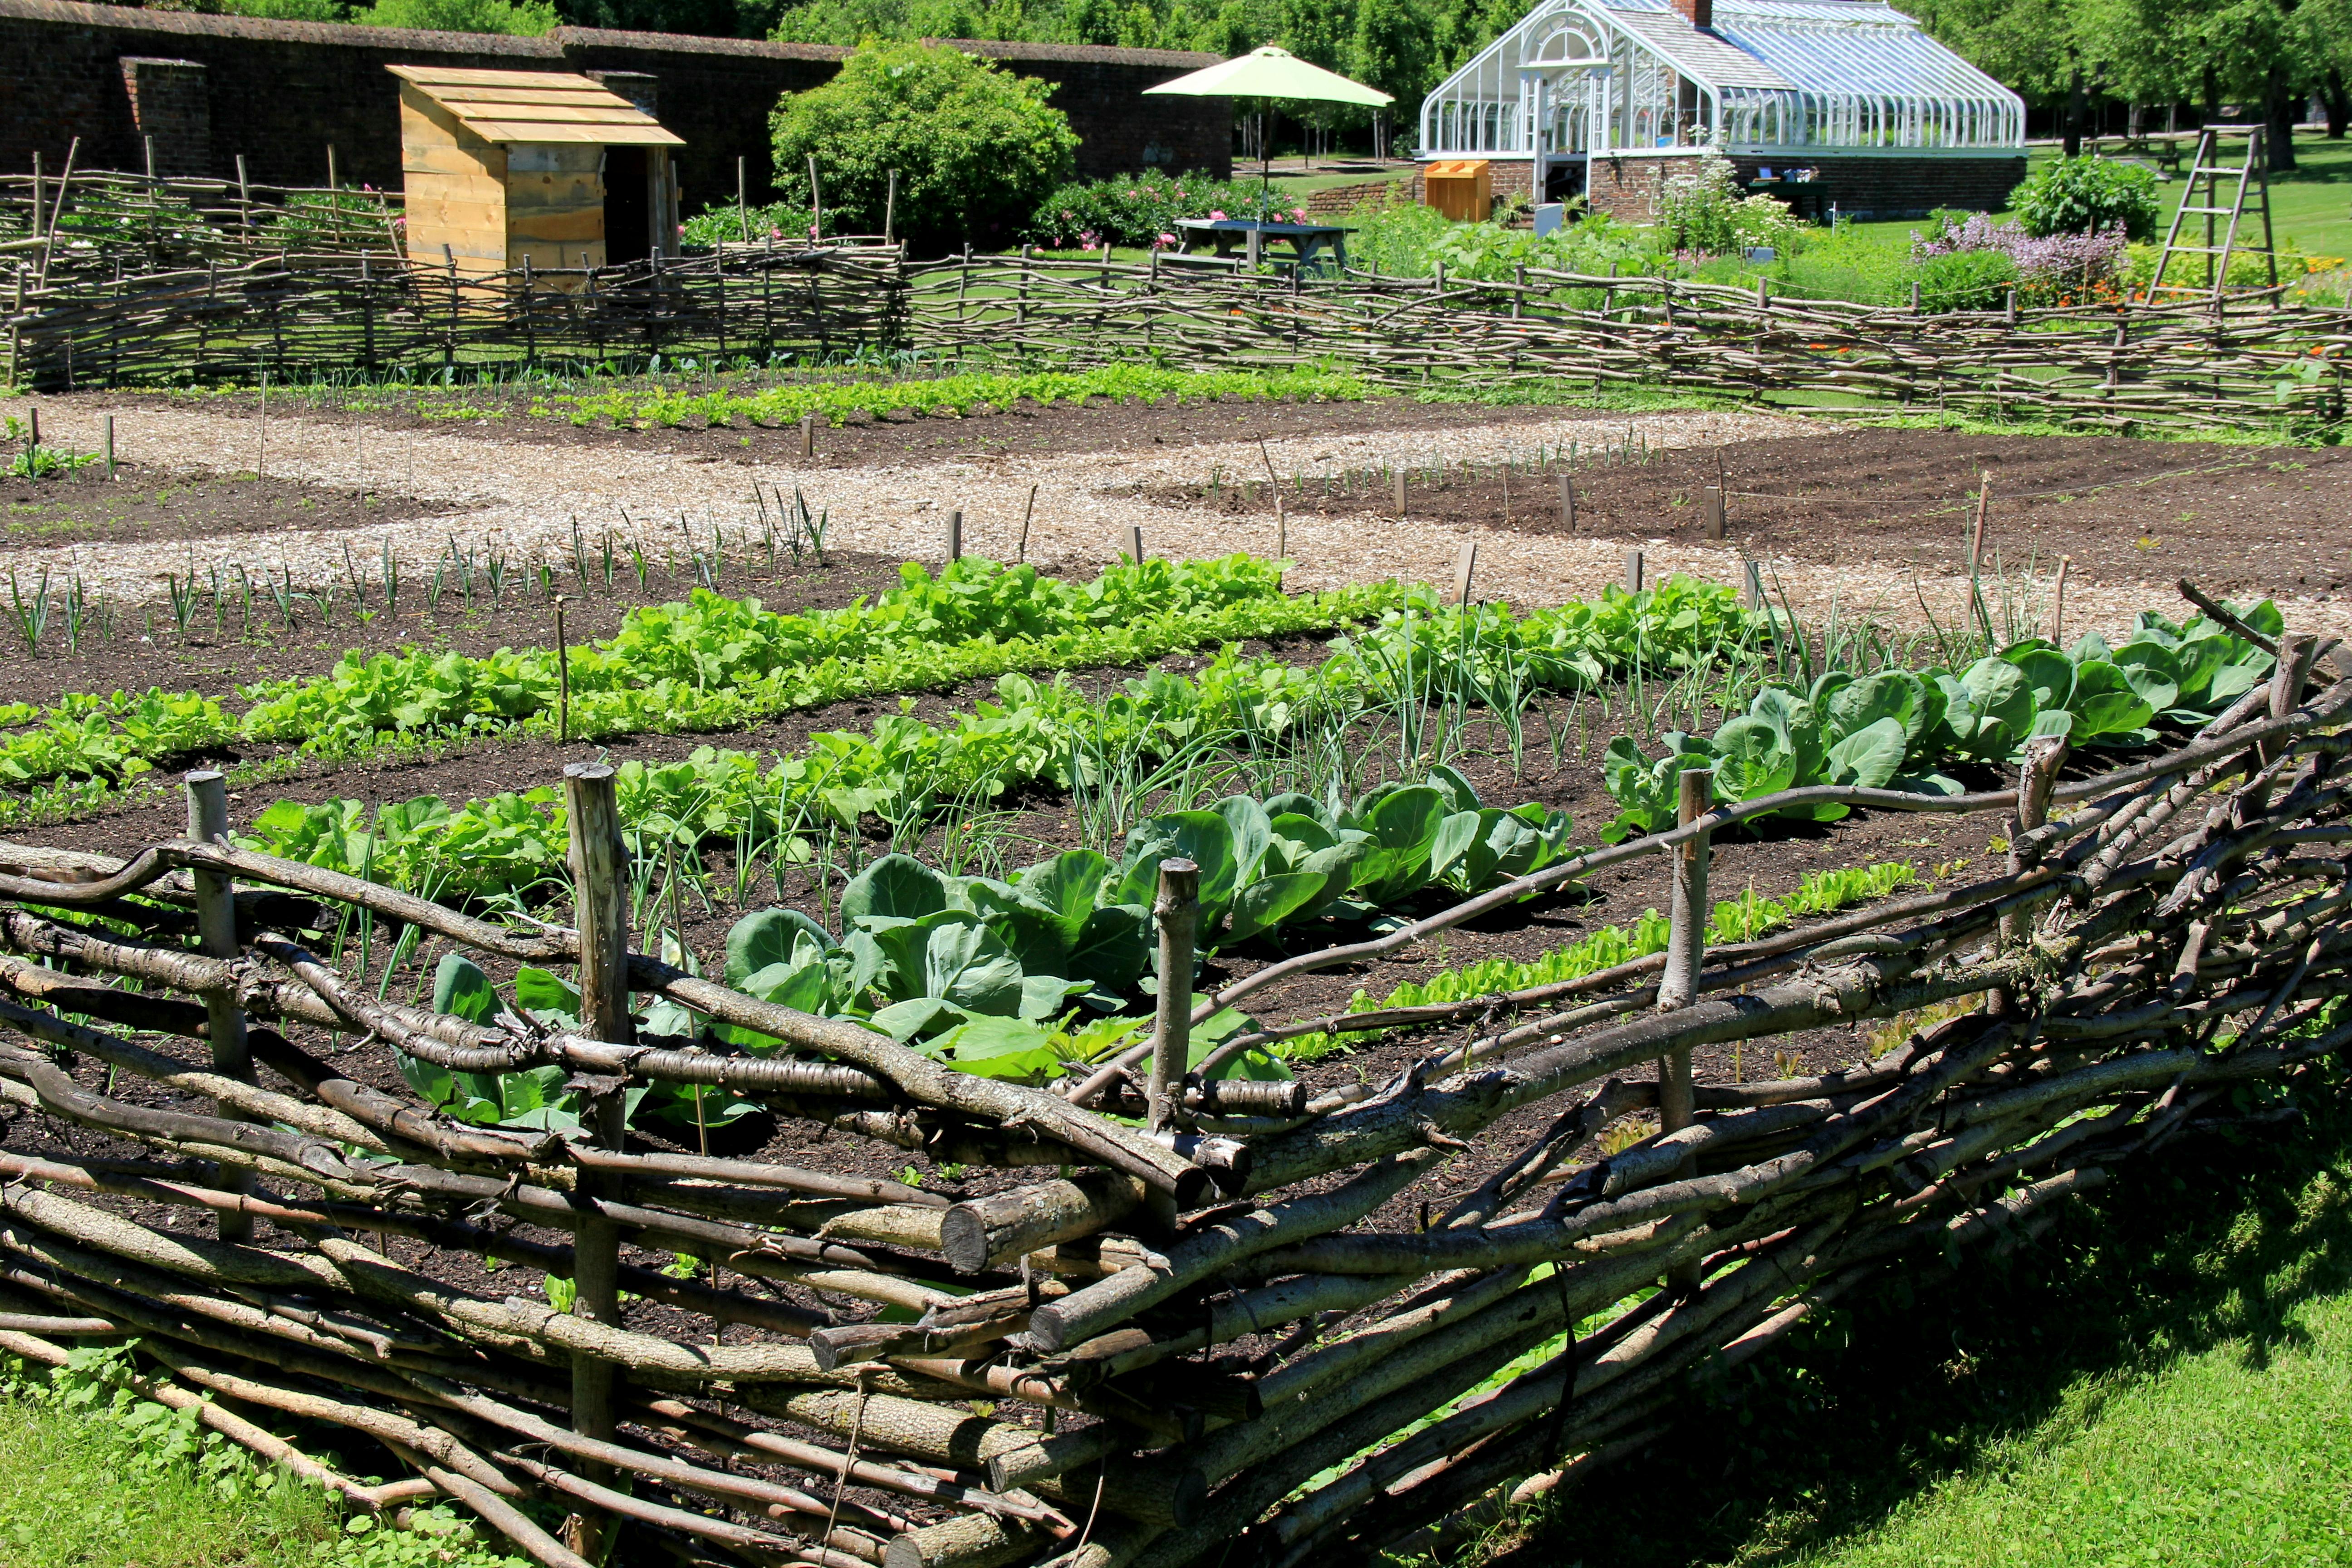 Farm in New York state with vegetables growing in a fenced garden.